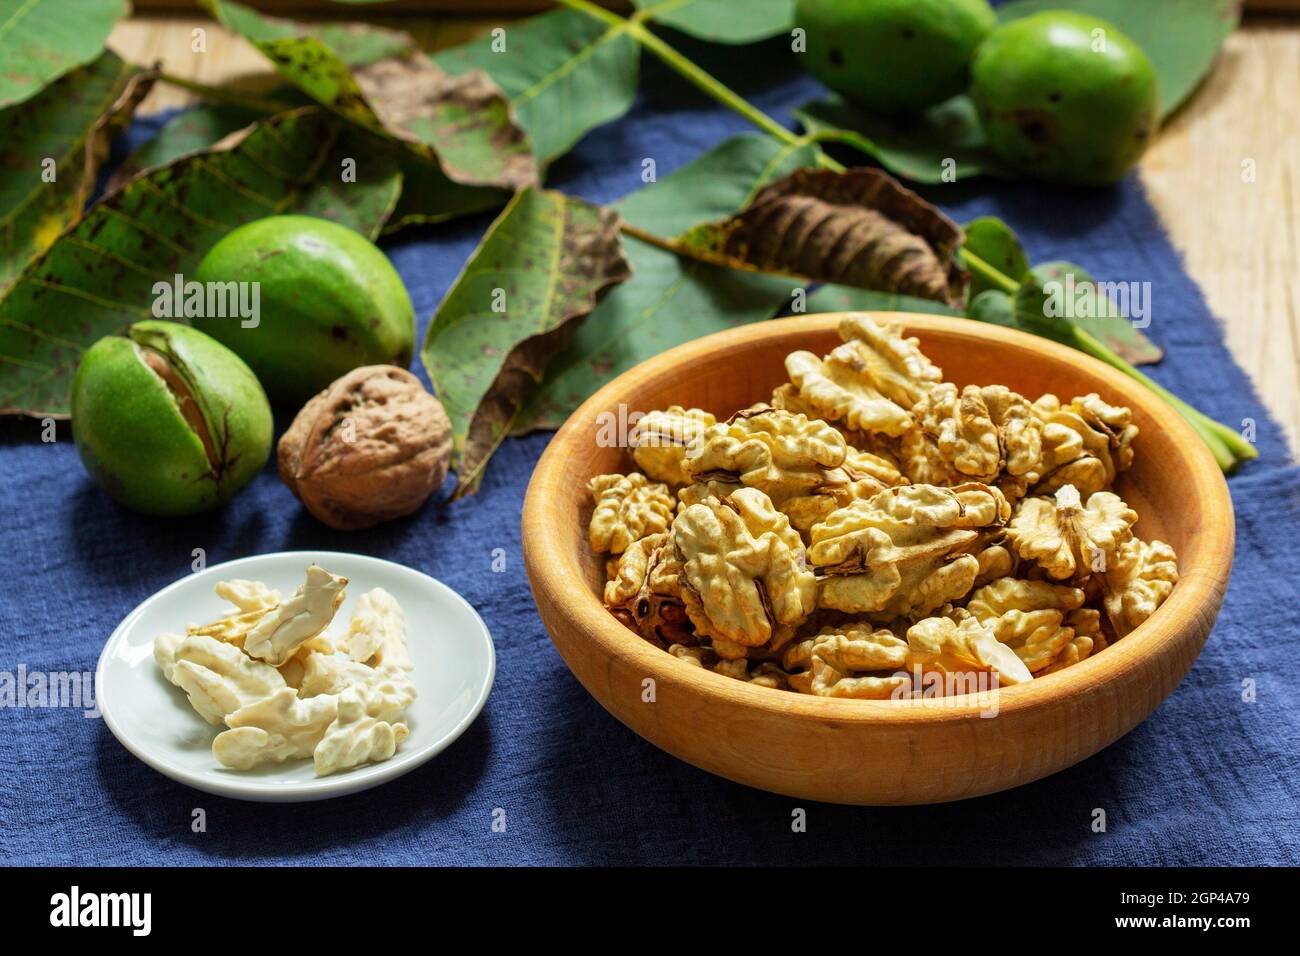 Young walnuts, shelled and in shell, walnut leaves. Rustic style. Stock Photo